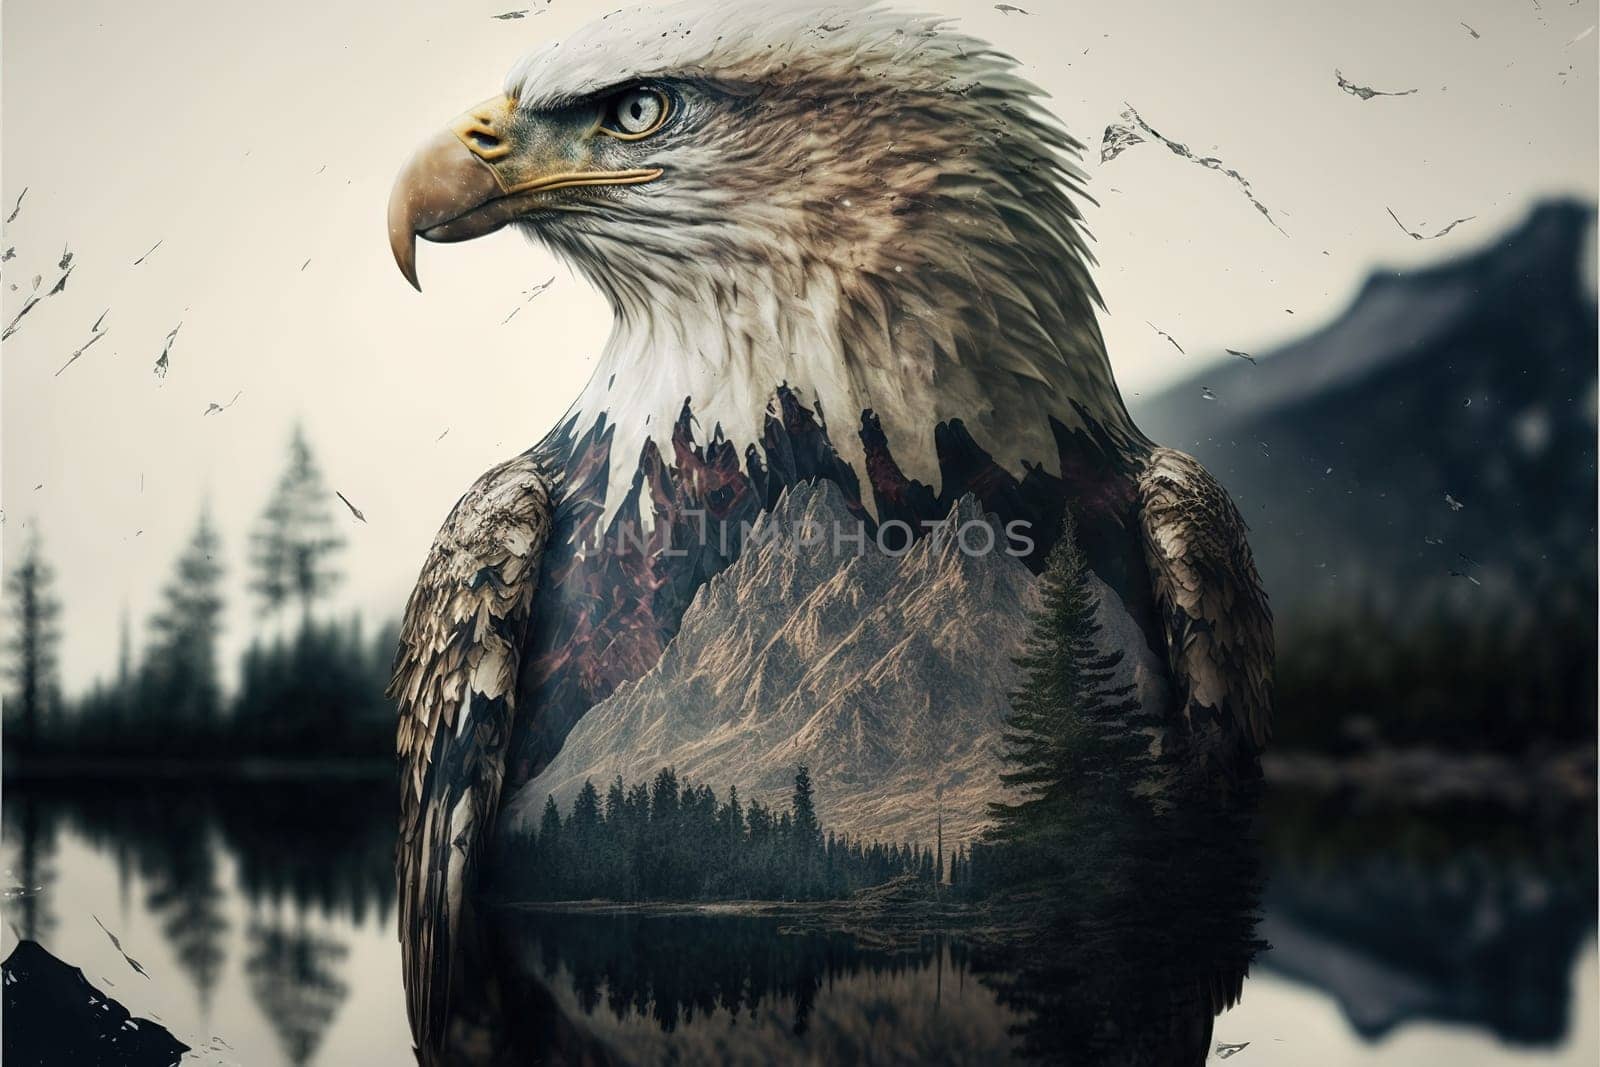 Bird of of prey eagle portrait with double exposure nature background by biancoblue